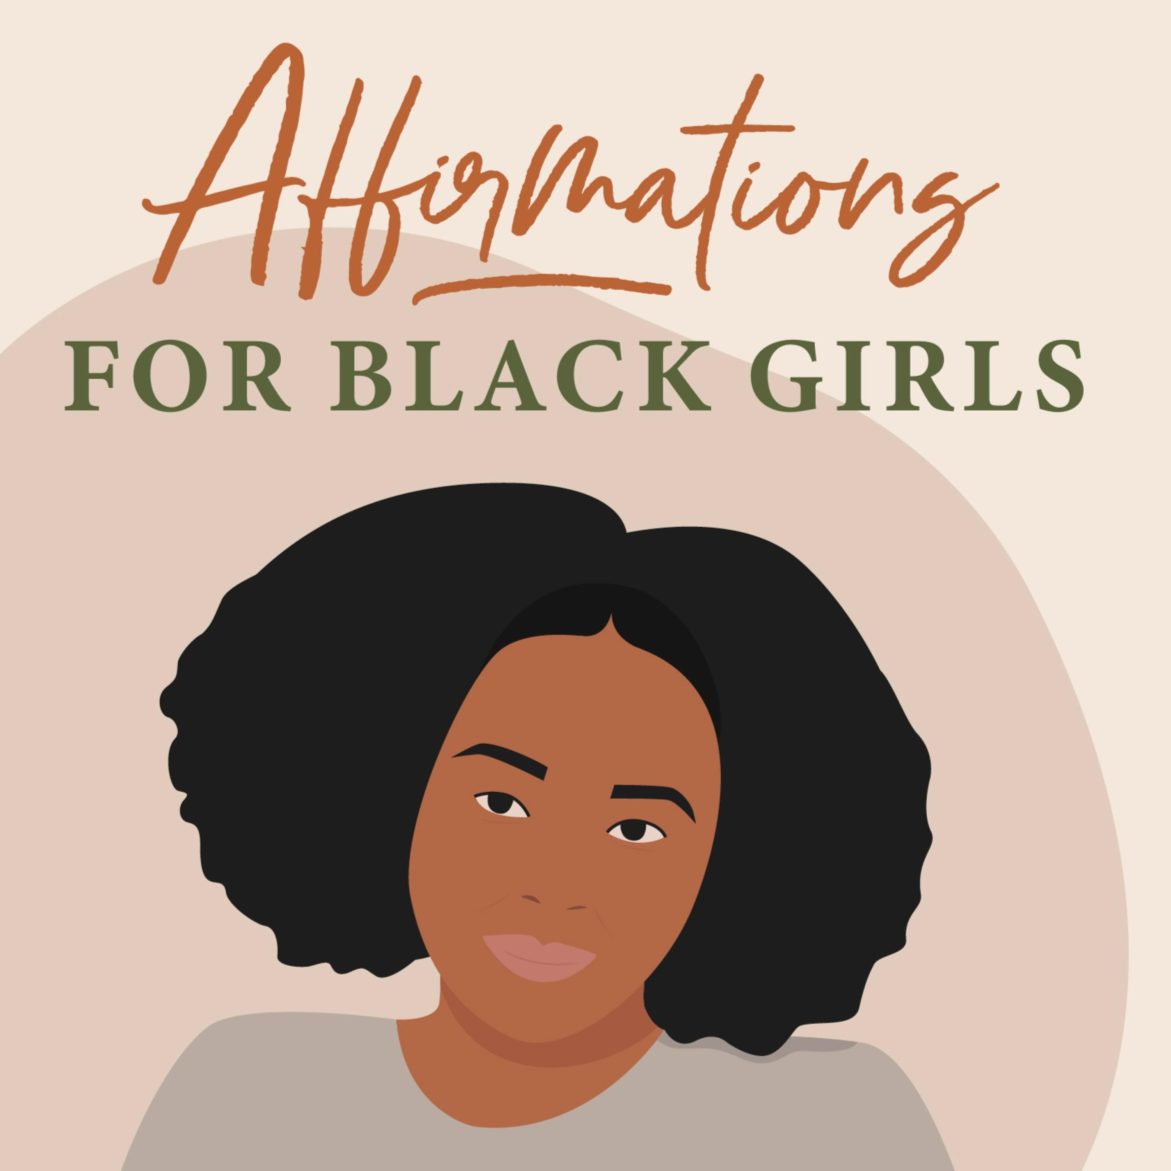 Black Podcasting - Prioritizing YOU in this Season. Finding Peace Amid Chaos: Navigating the Holiday Blues. Home For the Holidays Pt 3 | A Guide to Self-Care